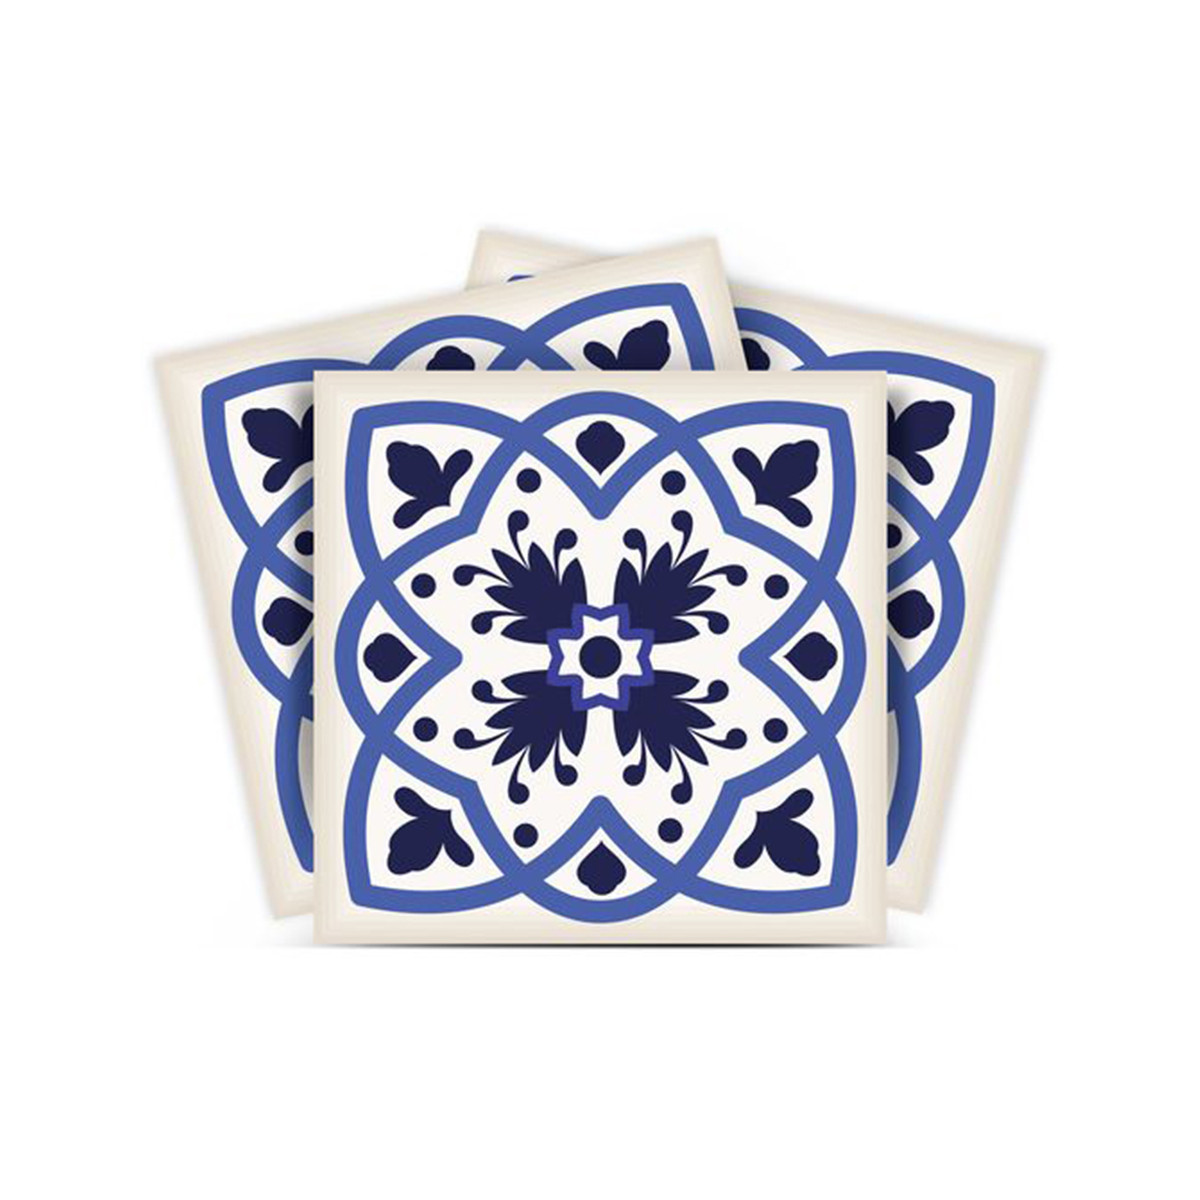 8" X 8" Blue And White Mosaic Peel And Stick Removable Tiles-399829-1